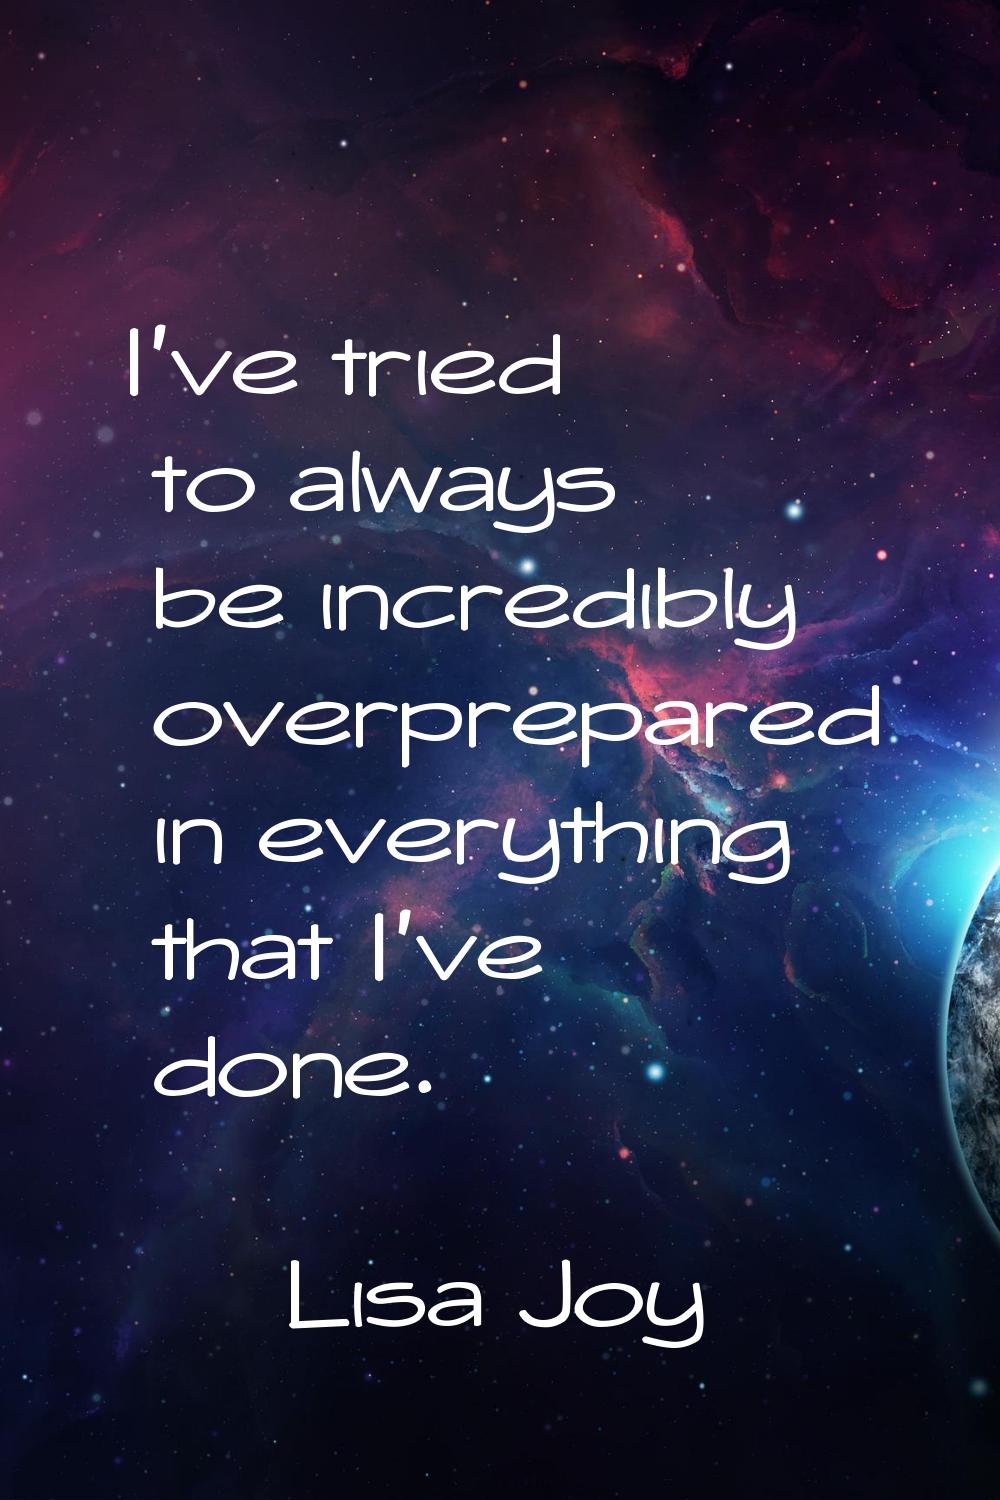 I've tried to always be incredibly overprepared in everything that I've done.